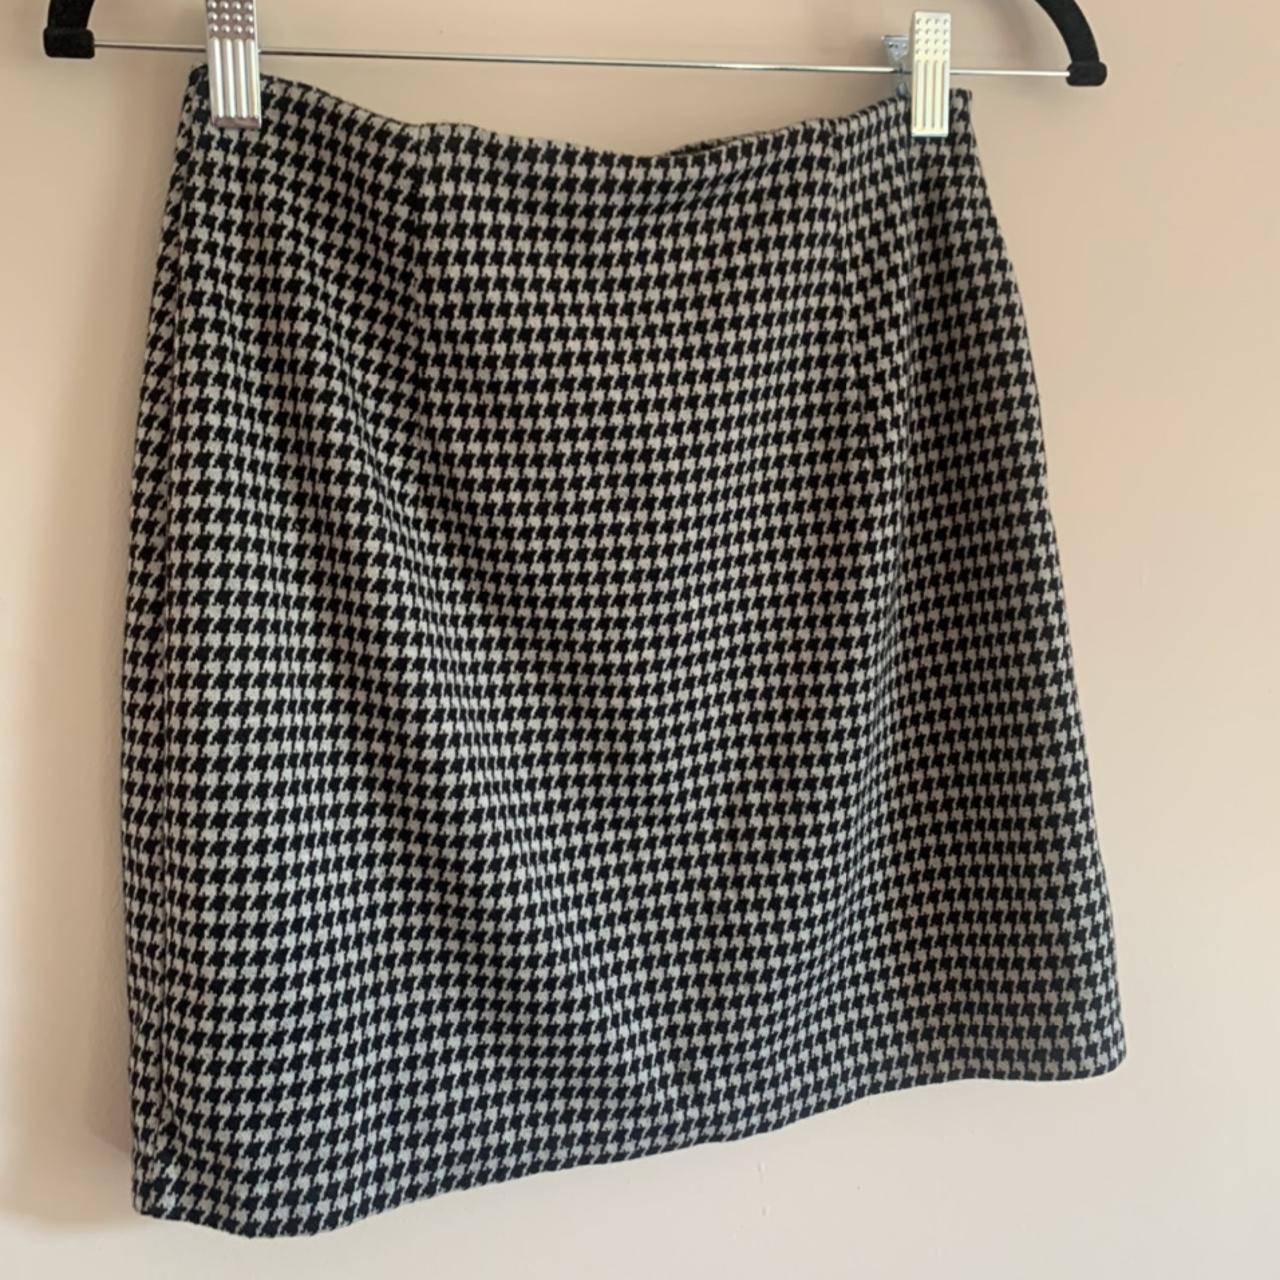 Stretchy dogs tooth mini skirt. Perfect for office... - Depop